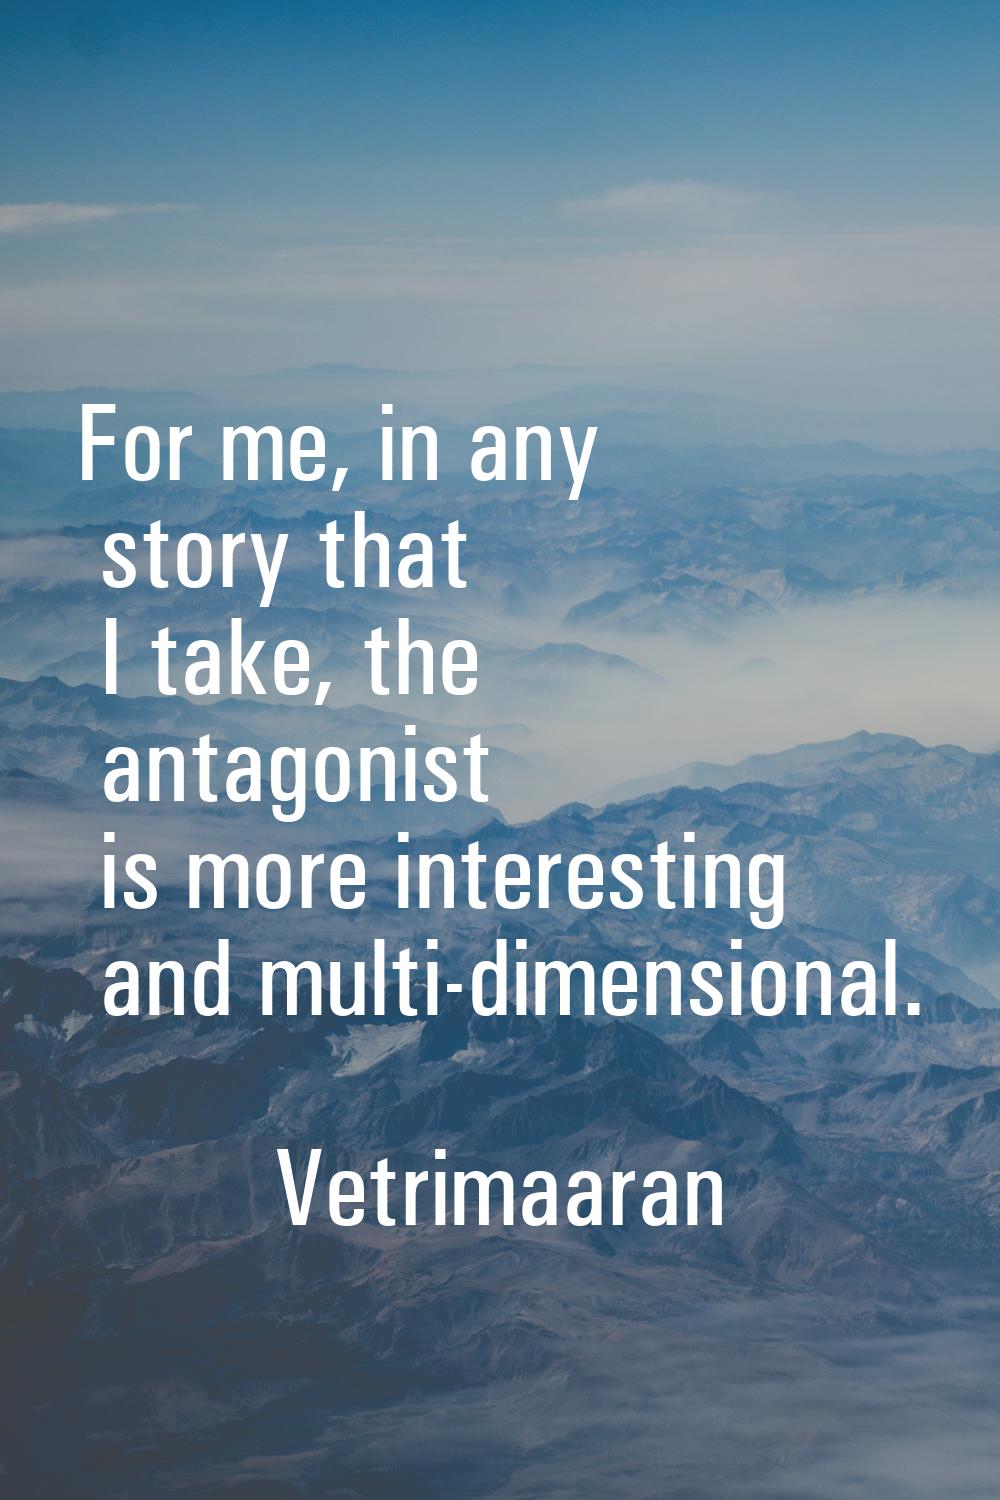 For me, in any story that I take, the antagonist is more interesting and multi-dimensional.